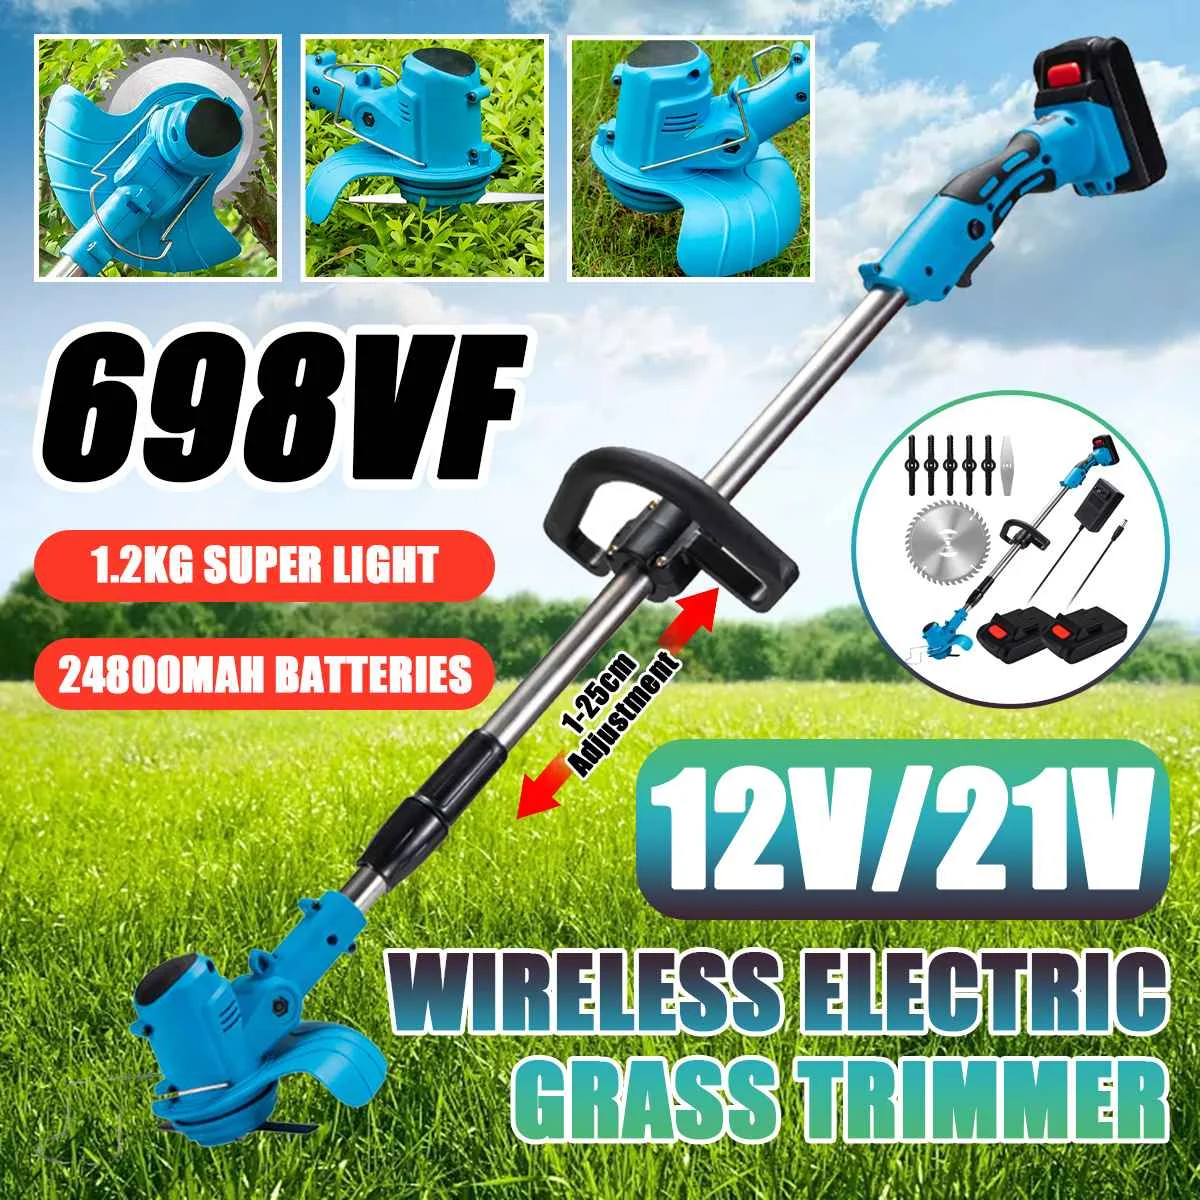 

698VF Electric Lawn Mower Adjustable Handheld 12V/21V Cordless Grass Hedge Trimmer Mowing Machine Garden 2 Battery Power Tool